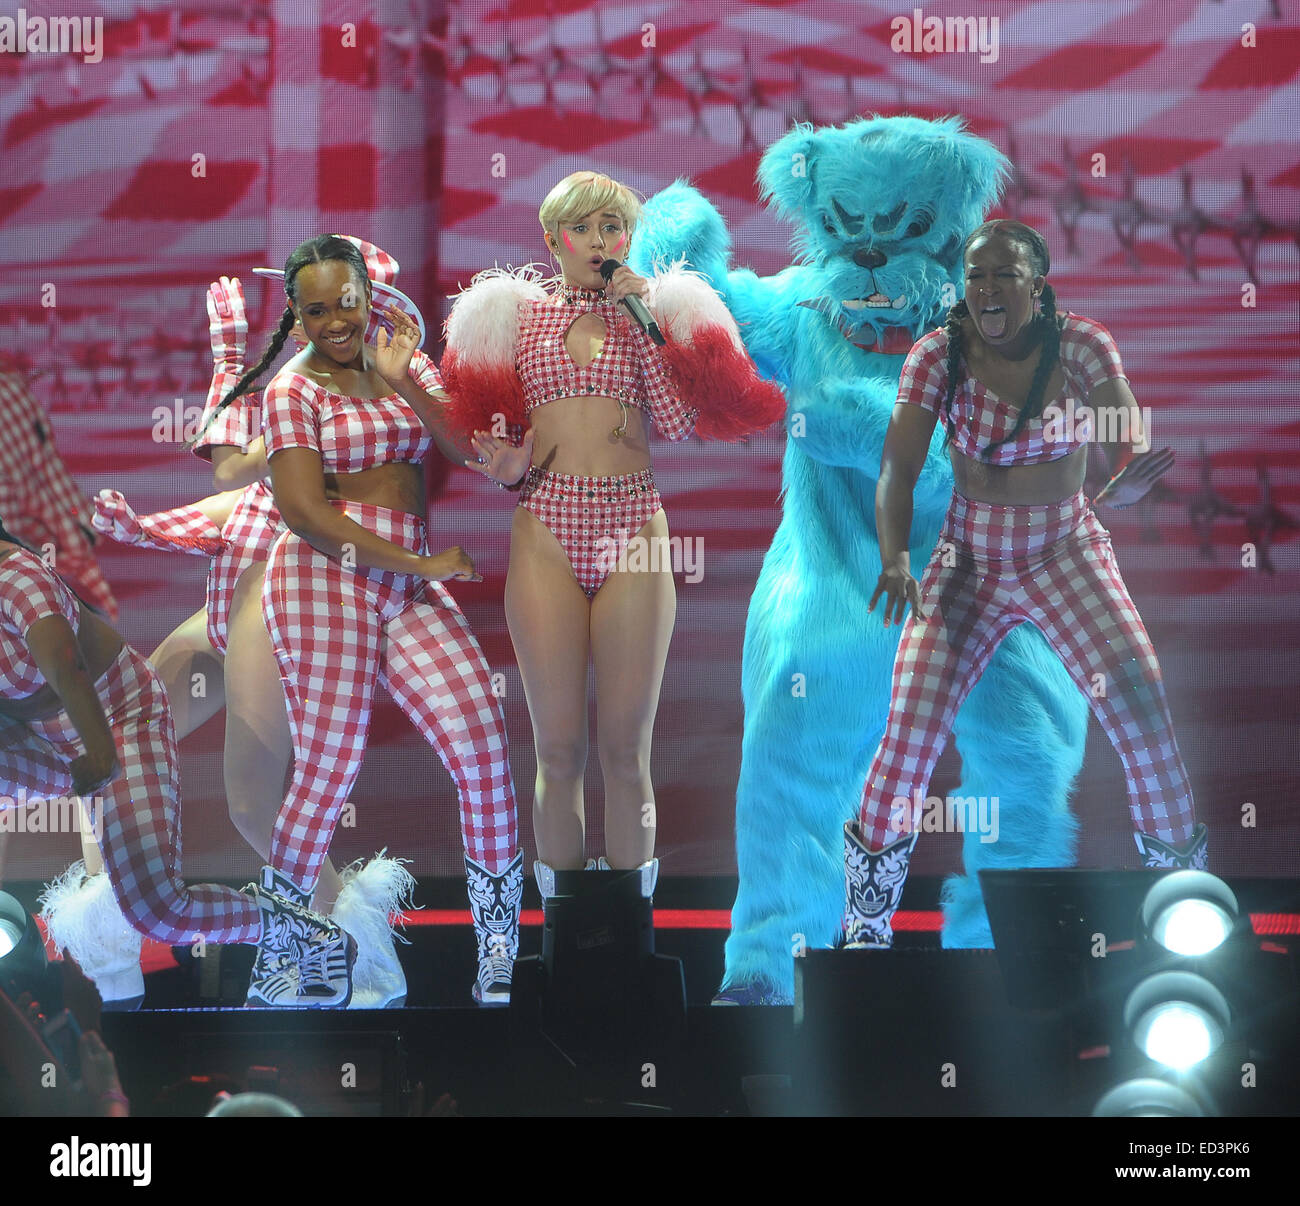 Miley Cyrus performs in a series of wacky outfits at the Ziggo Dome, for the final date of her European 'Bangerz' Tour. Miley spat water over her fans, and pretended to smoke a giant cardboard joint, given to her by someone in the crowd  Featuring: Miley Stock Photo